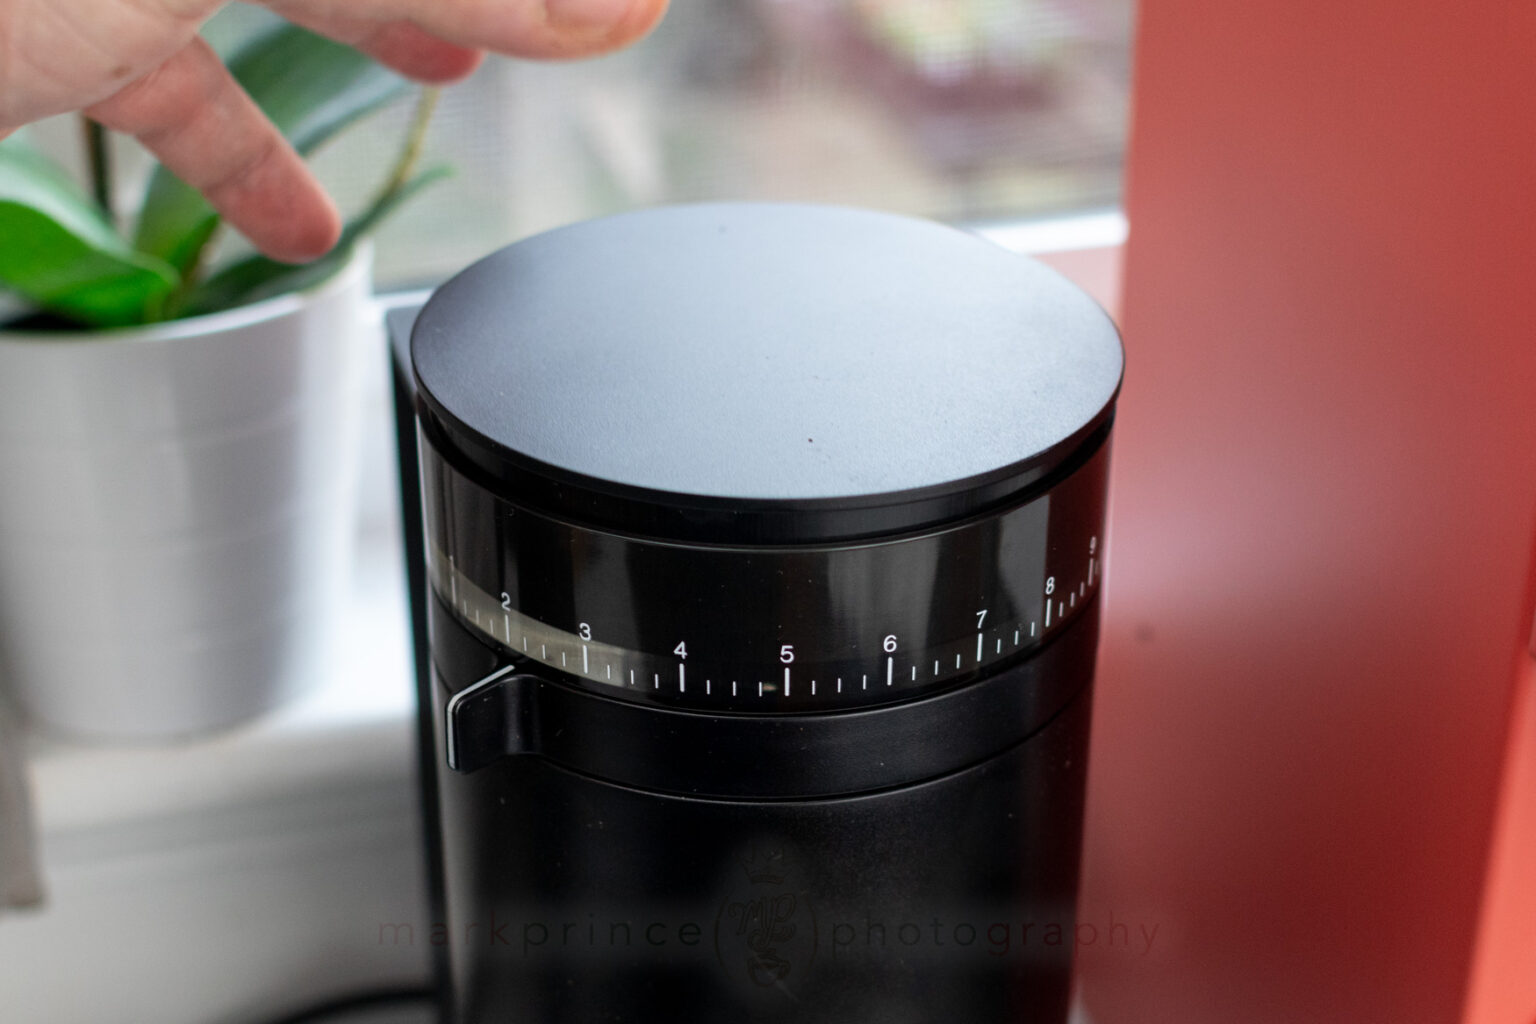 Lid dropped, it smoothly lowers into the hopper via an air cushion.